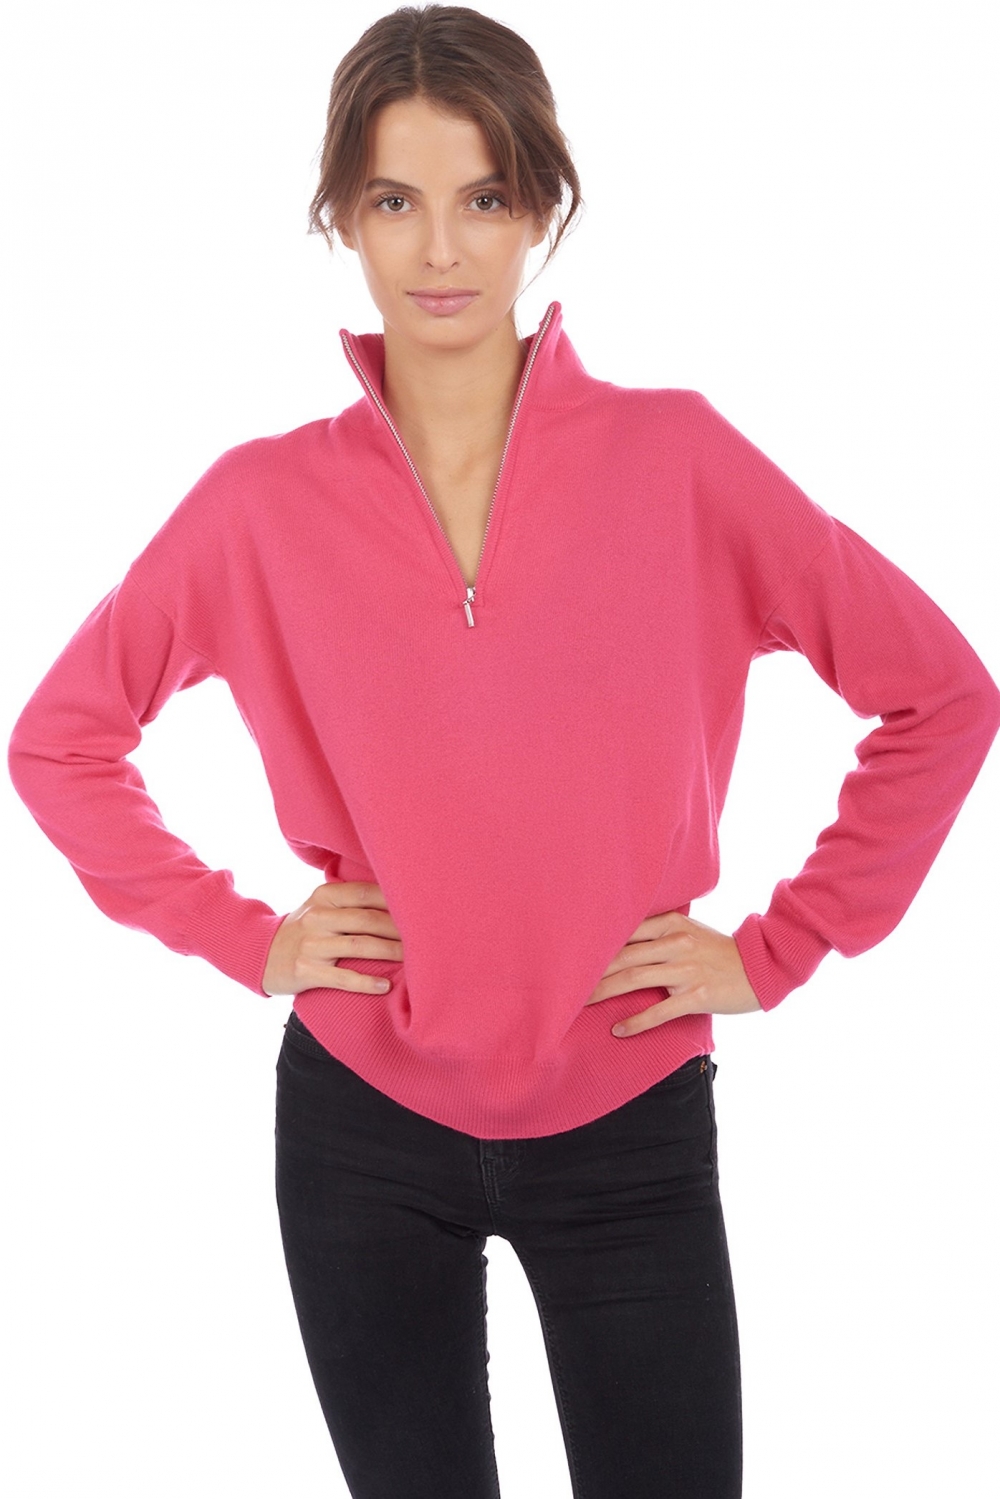 Cachemire pull femme col roule groseille rose shocking s